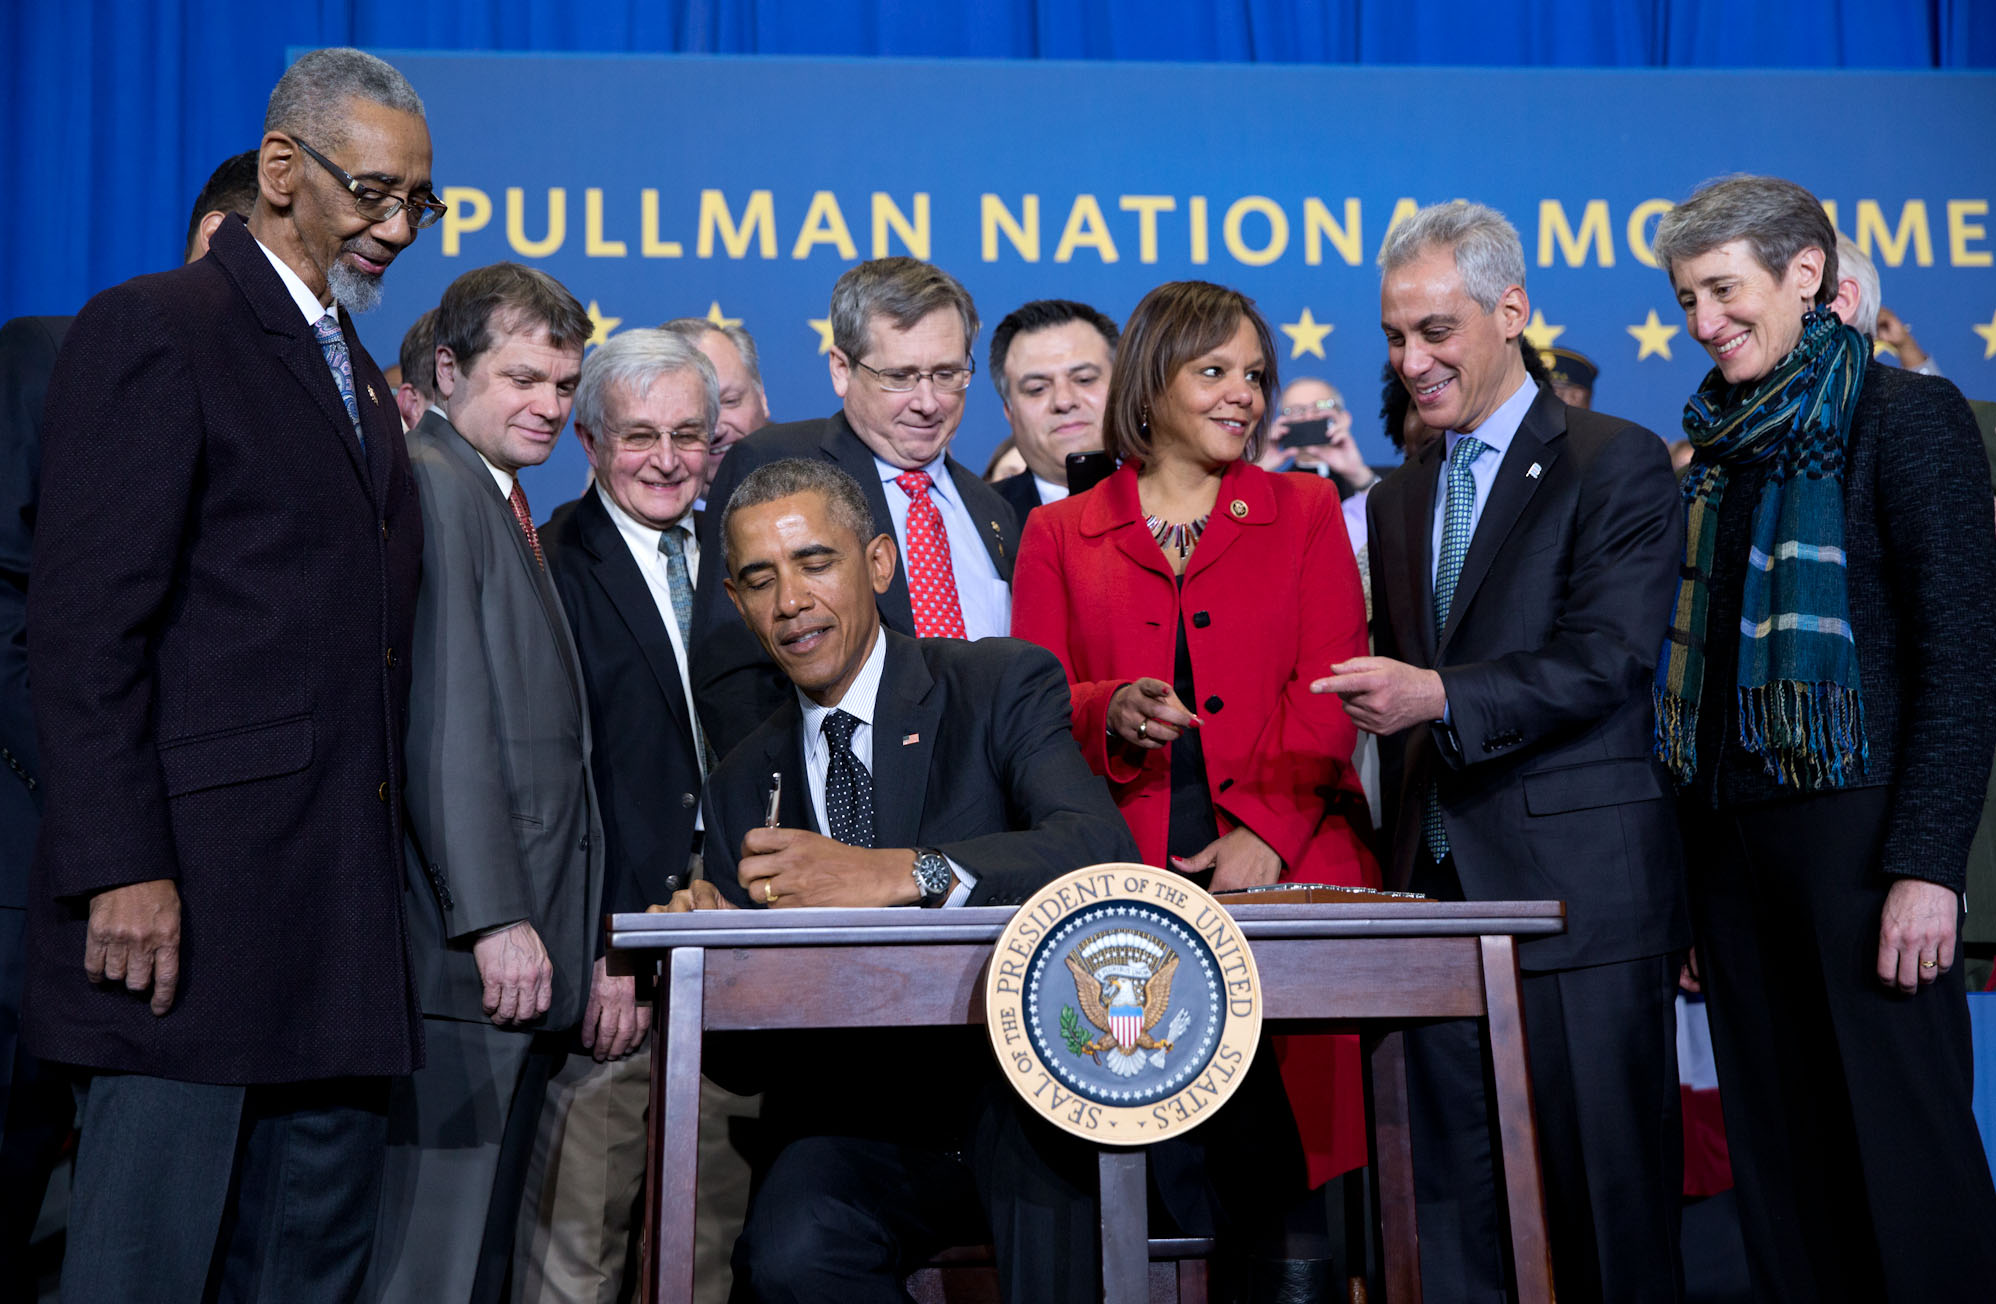 President Barack Obama signs a proclamation regarding the establishment of the Pullman National Monument